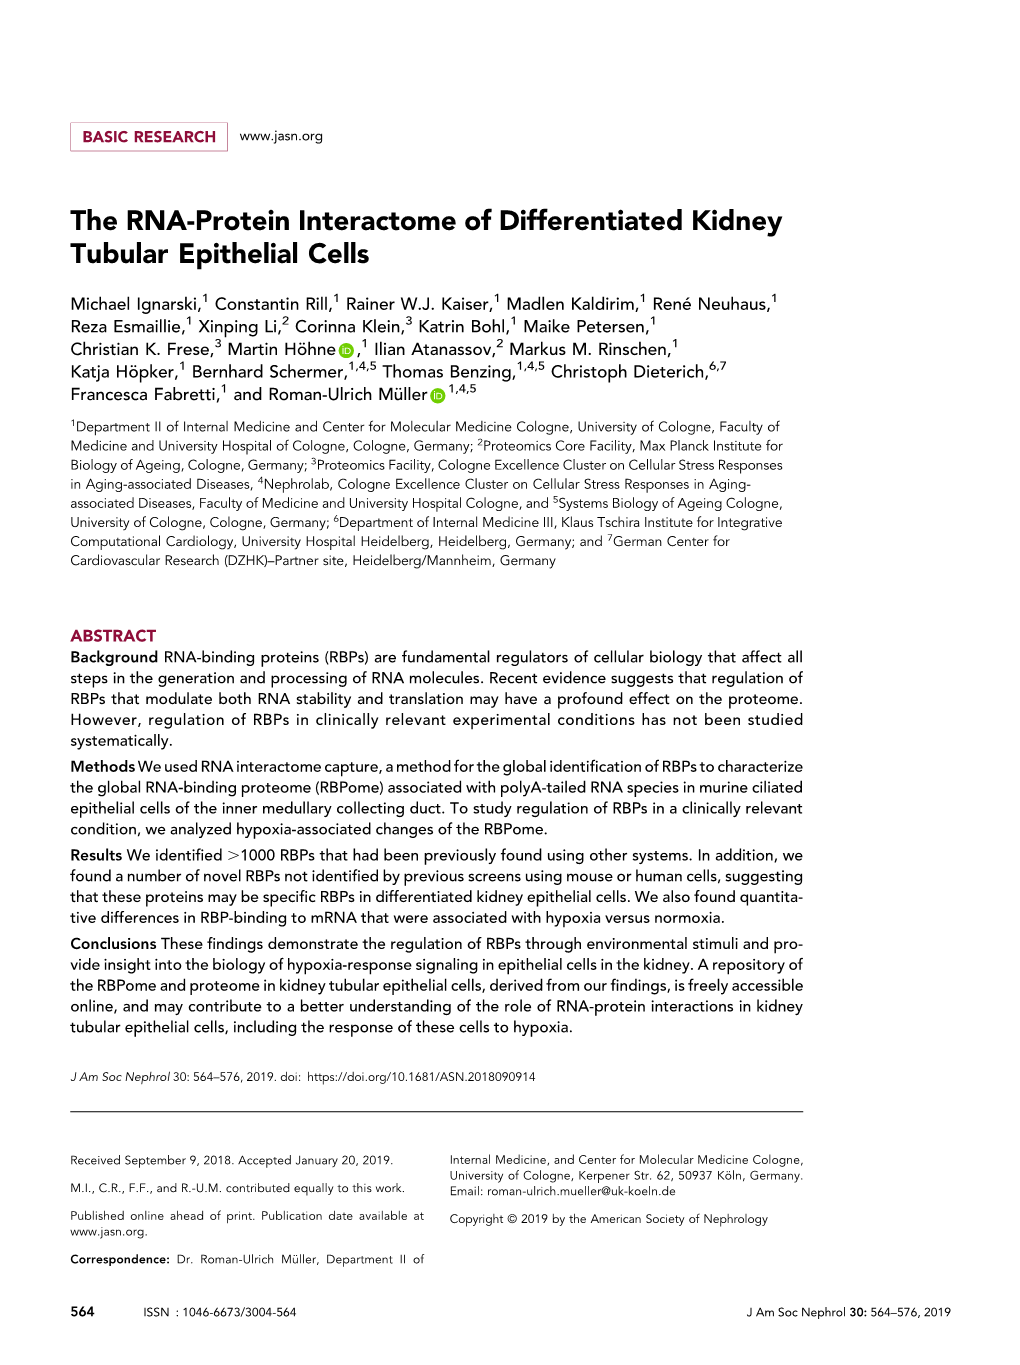 The RNA-Protein Interactome of Differentiated Kidney Tubular Epithelial Cells